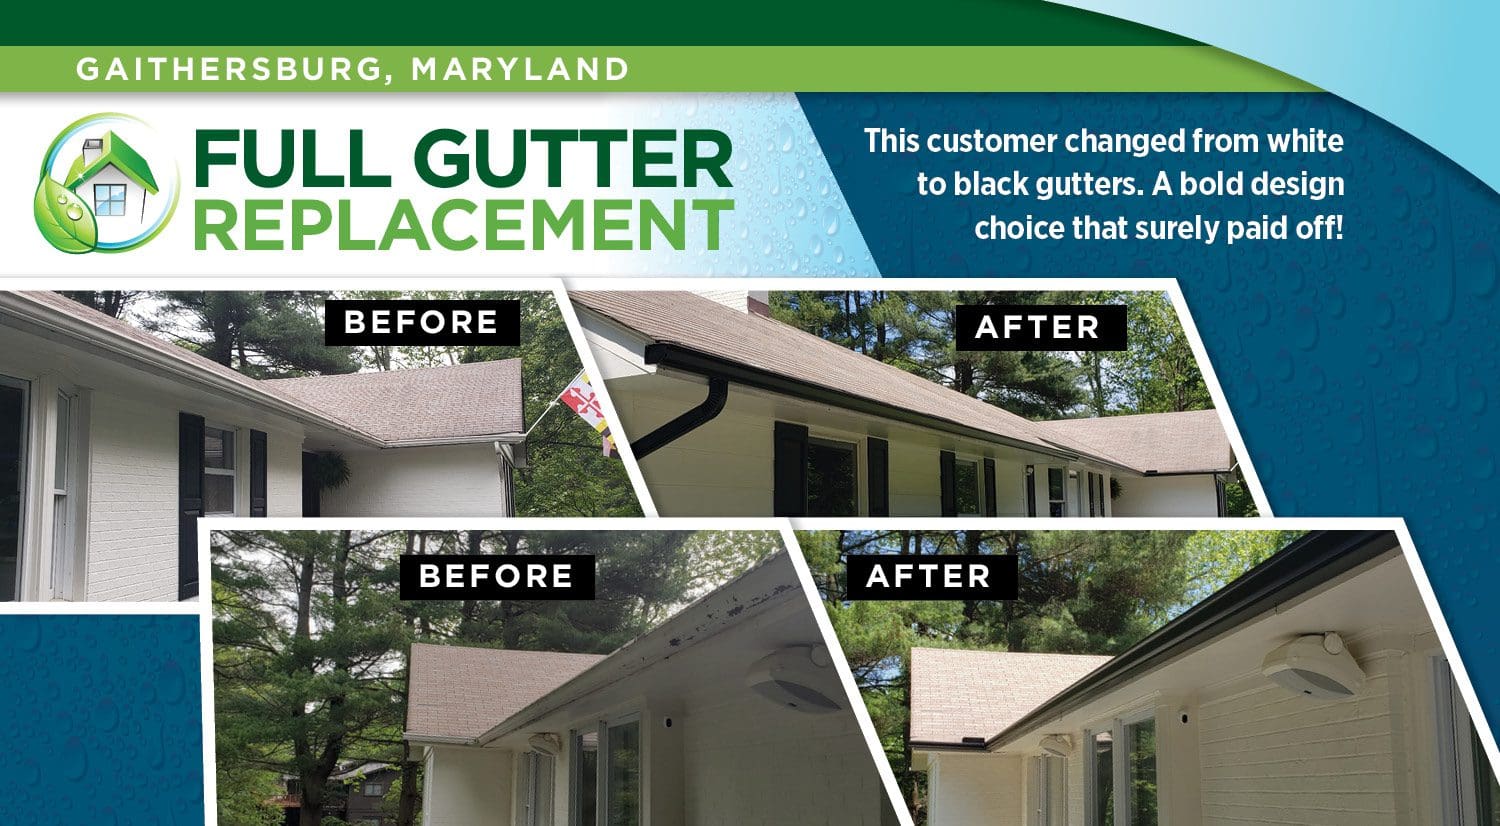 White to Black Gutters Before & After Image